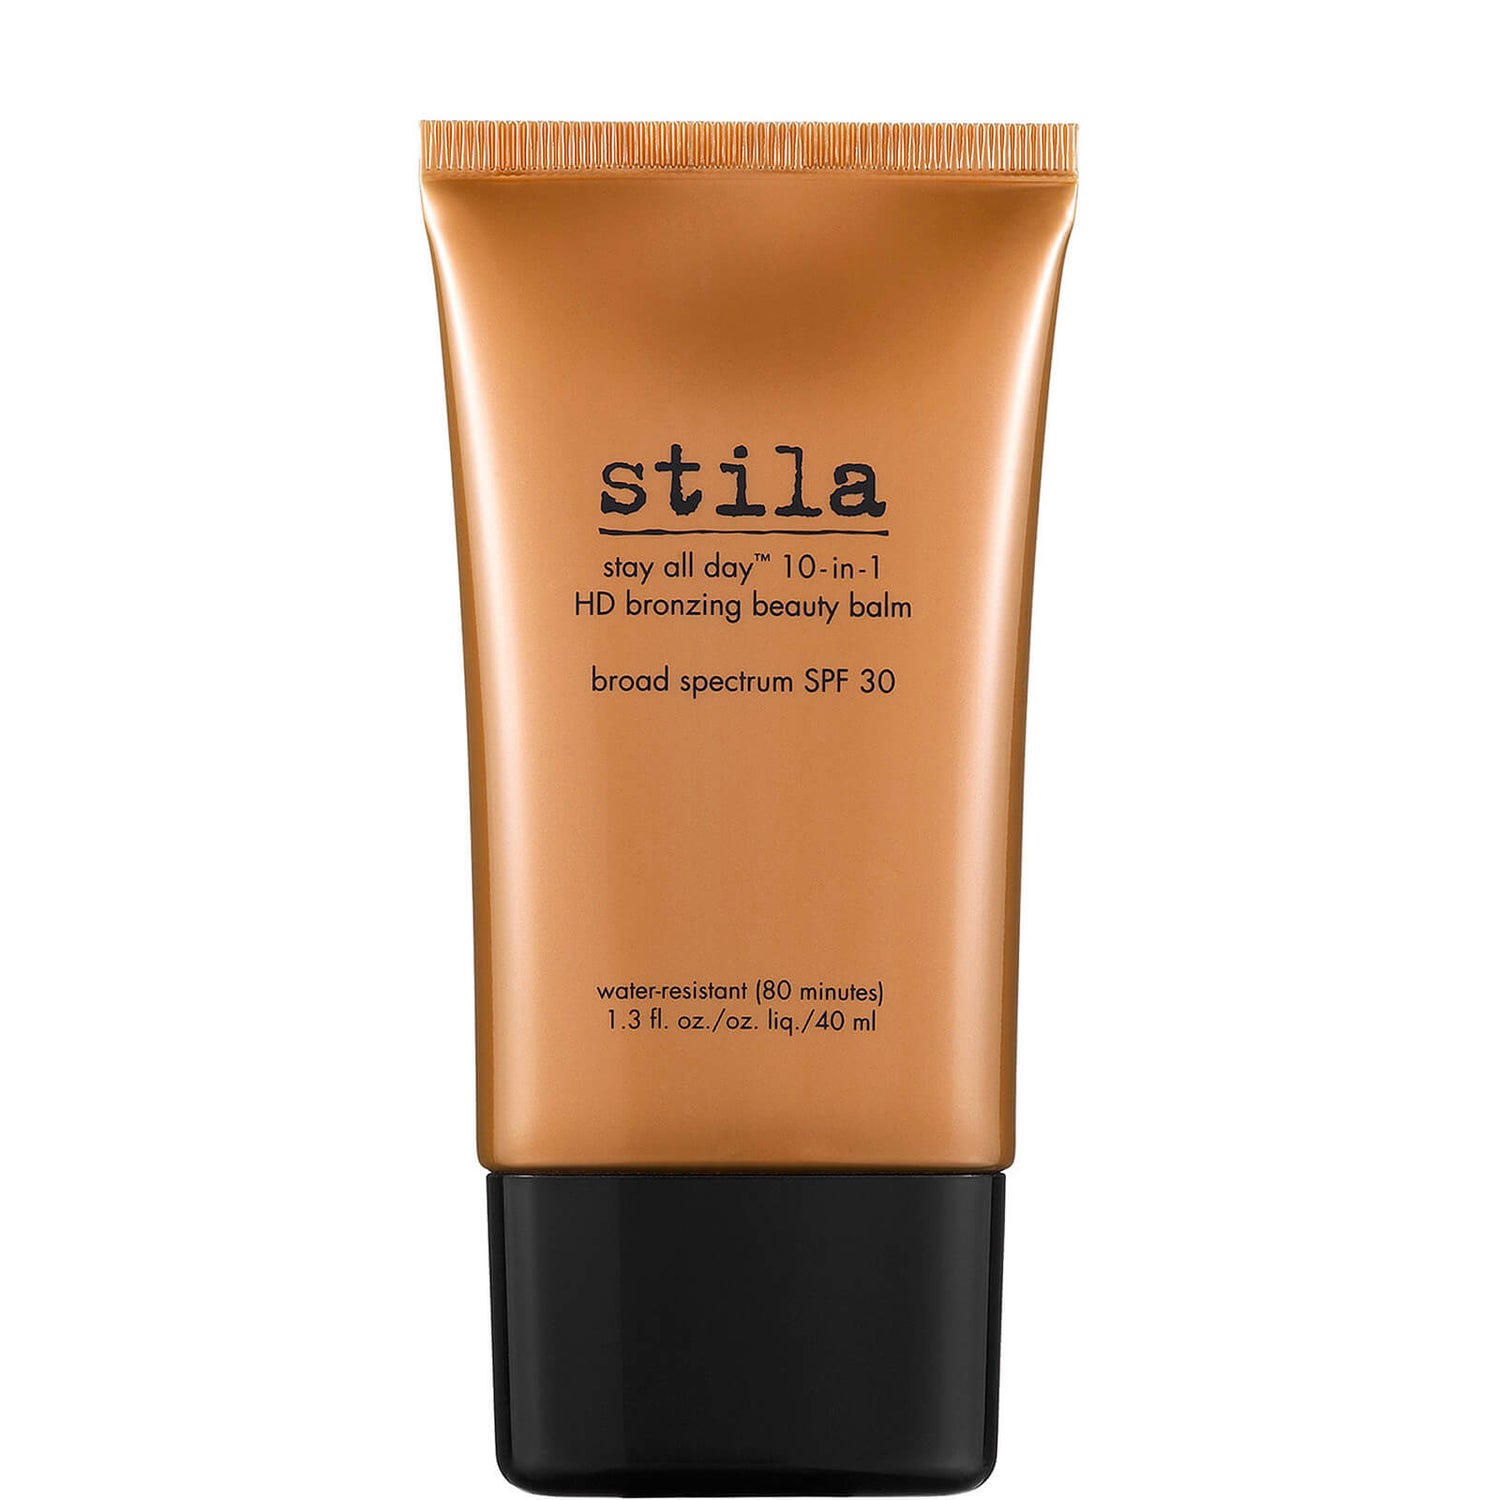 Stila Stay All Day 10-in-1 HD Bronzing Beauty Balm with SPF30